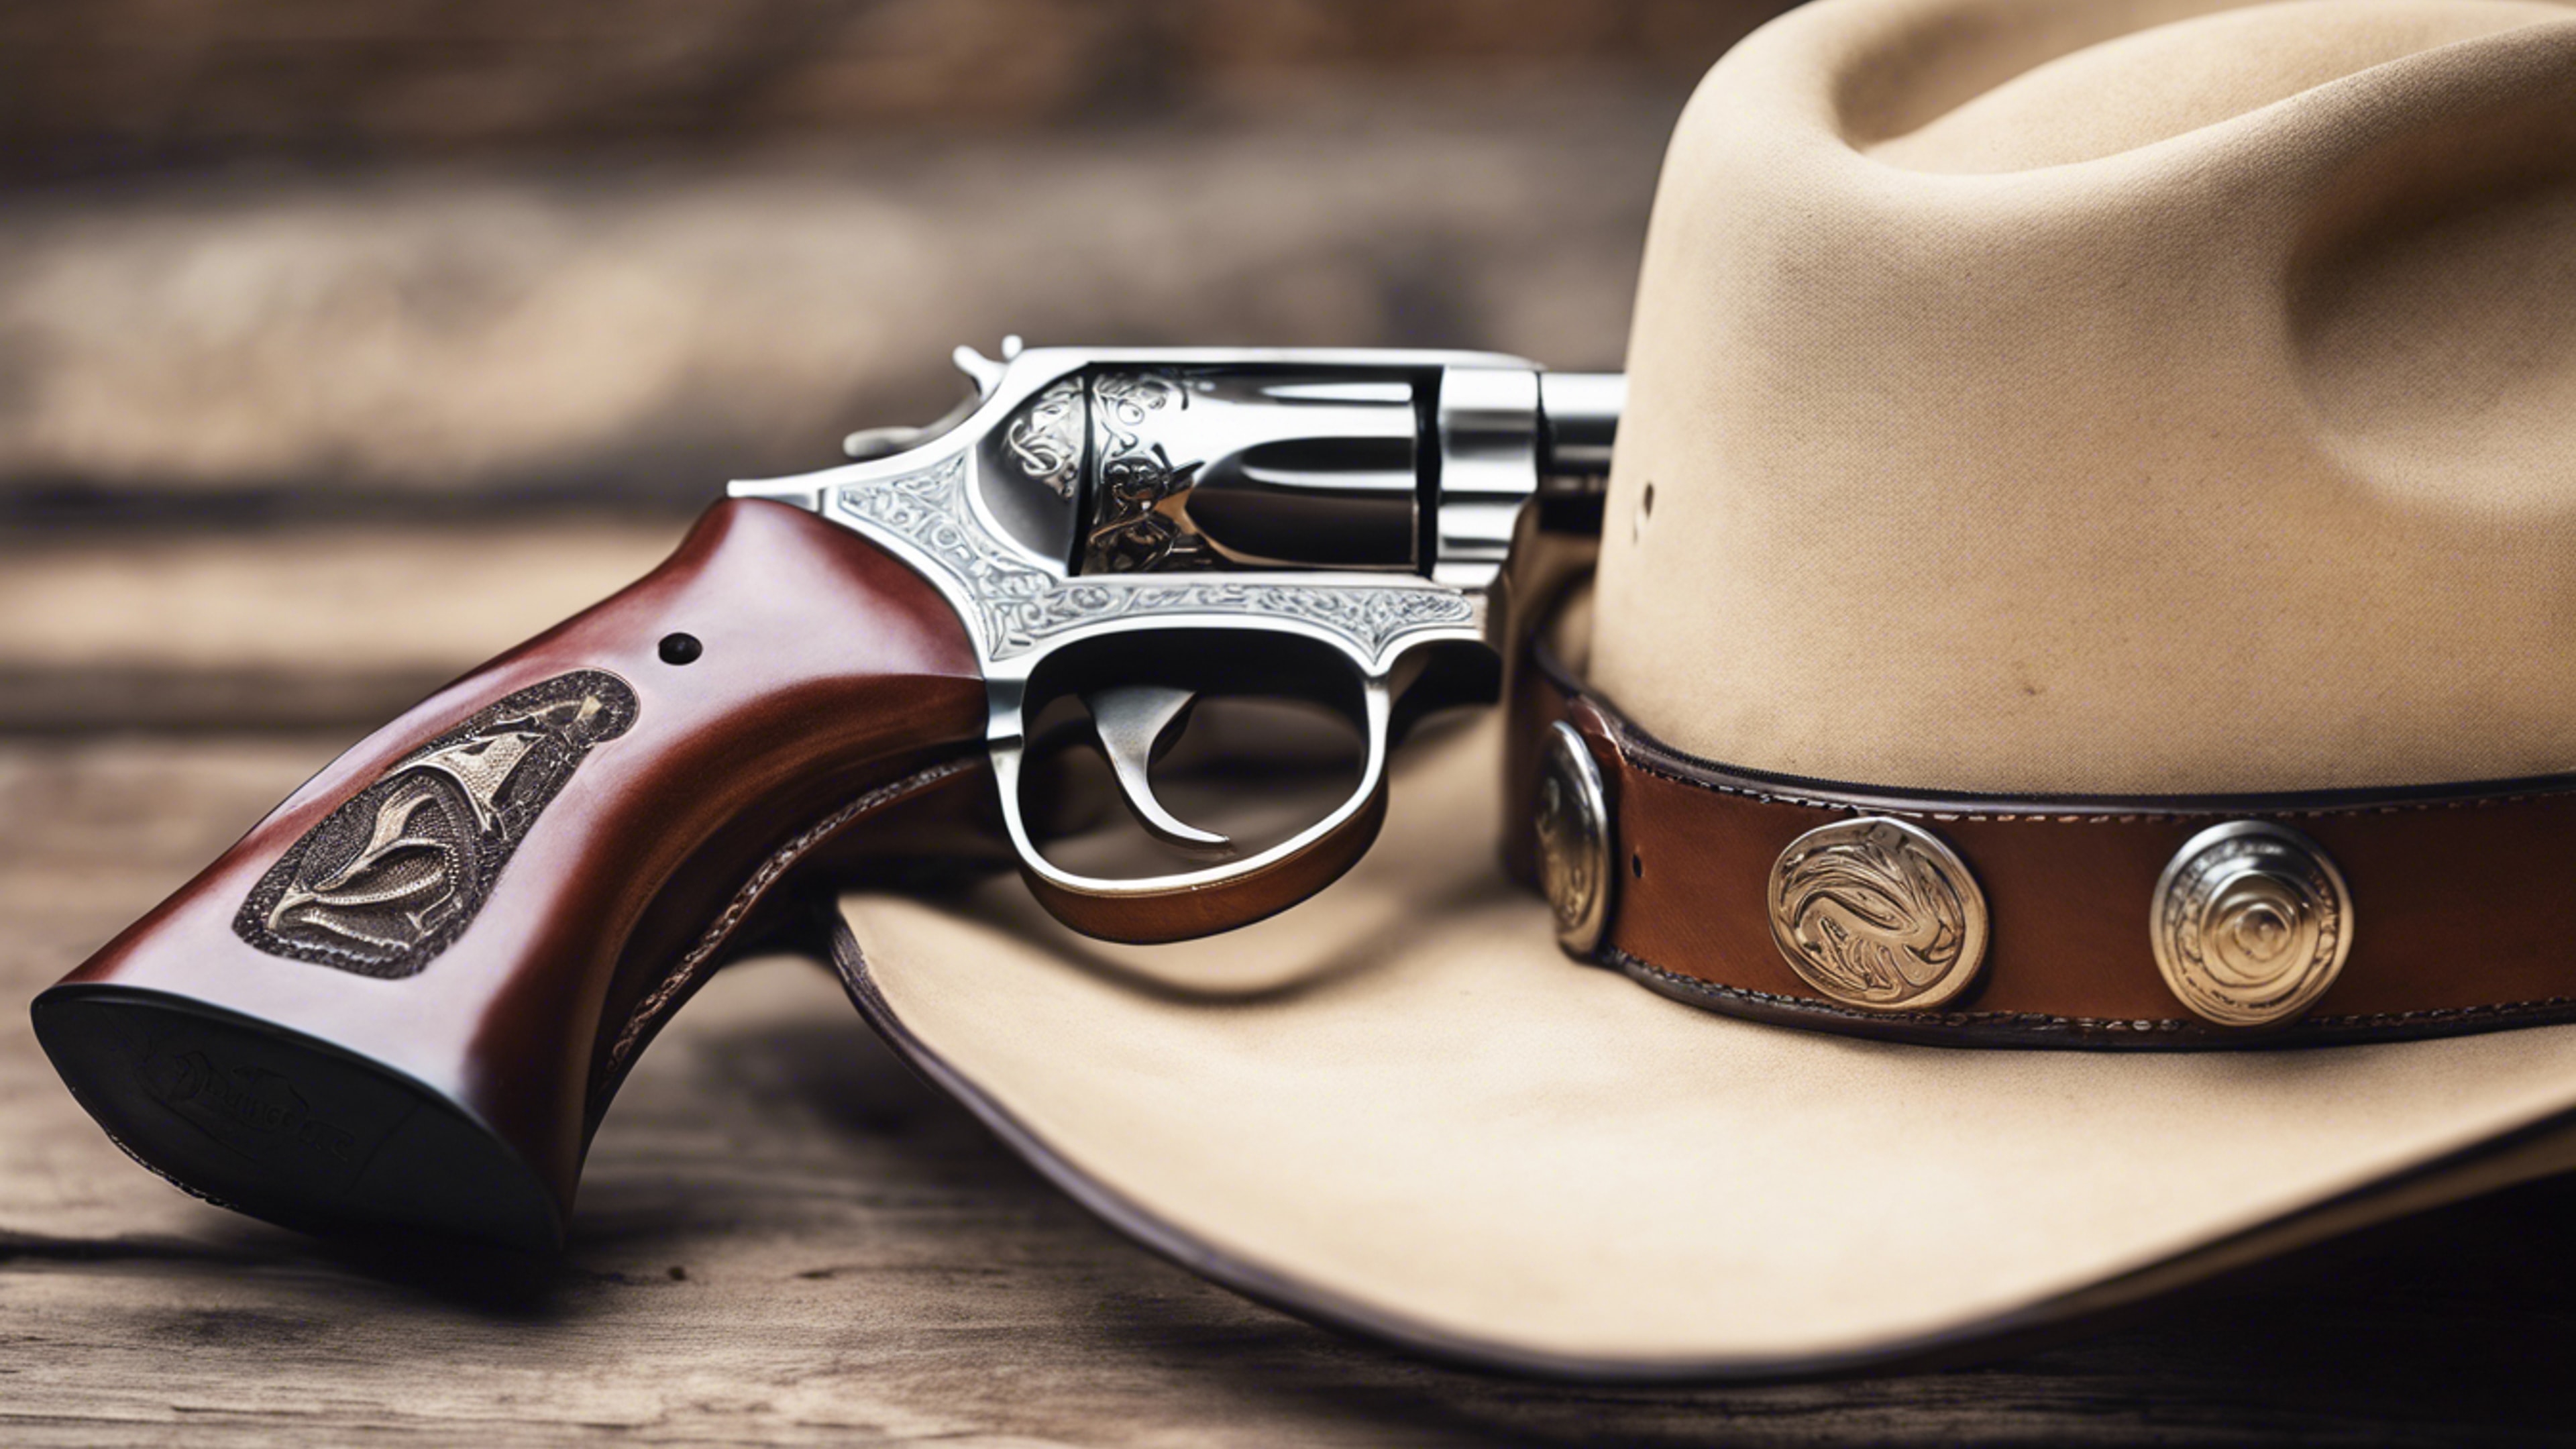 A detailed close-up of a cowboy hat, spurs, and a leather holster with a revolver. Обои[6dbcb72083d24ad78673]